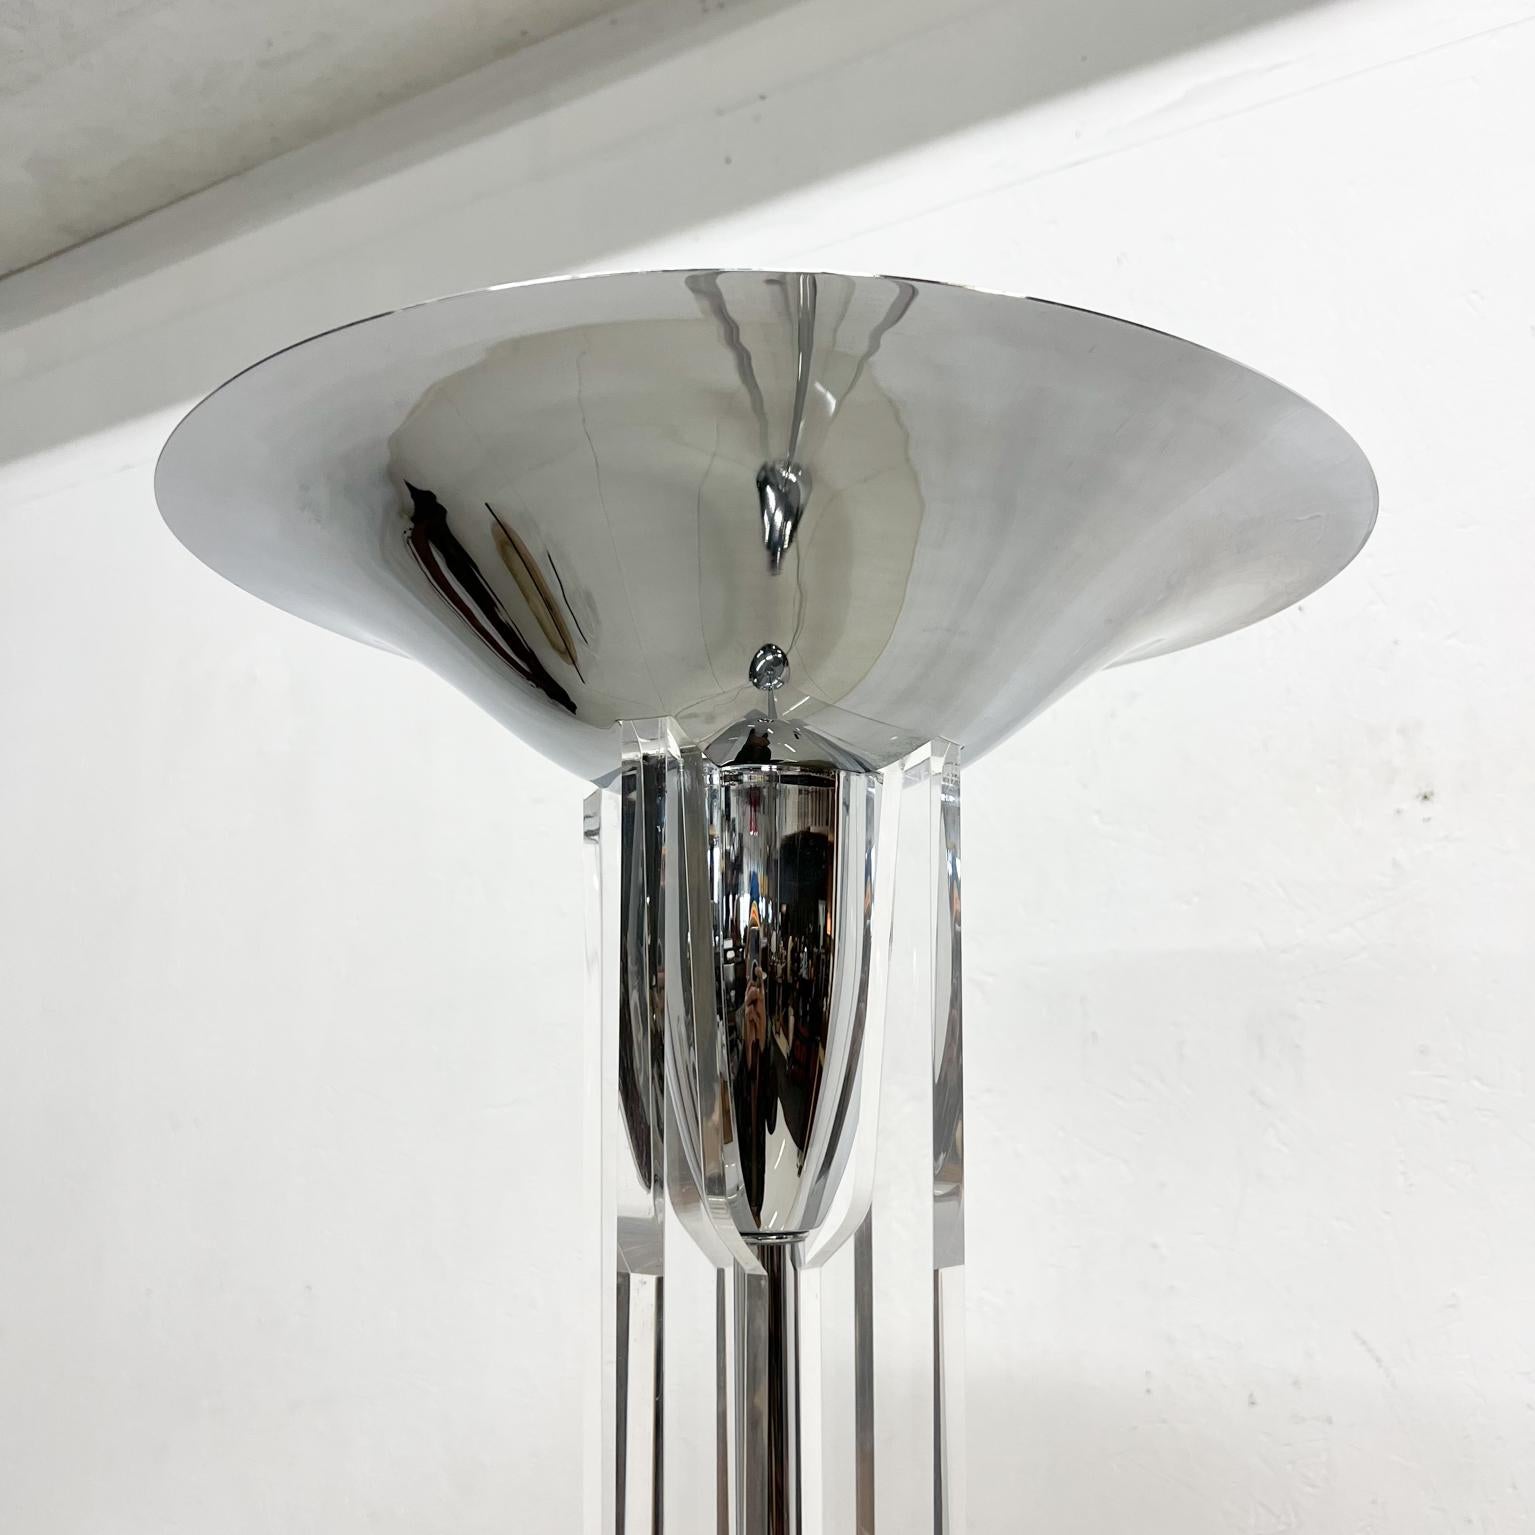 Late 20th Century Art Deco Moderne Chrome Torchiere Floor Lamp by Boyd Lighting Company For Sale